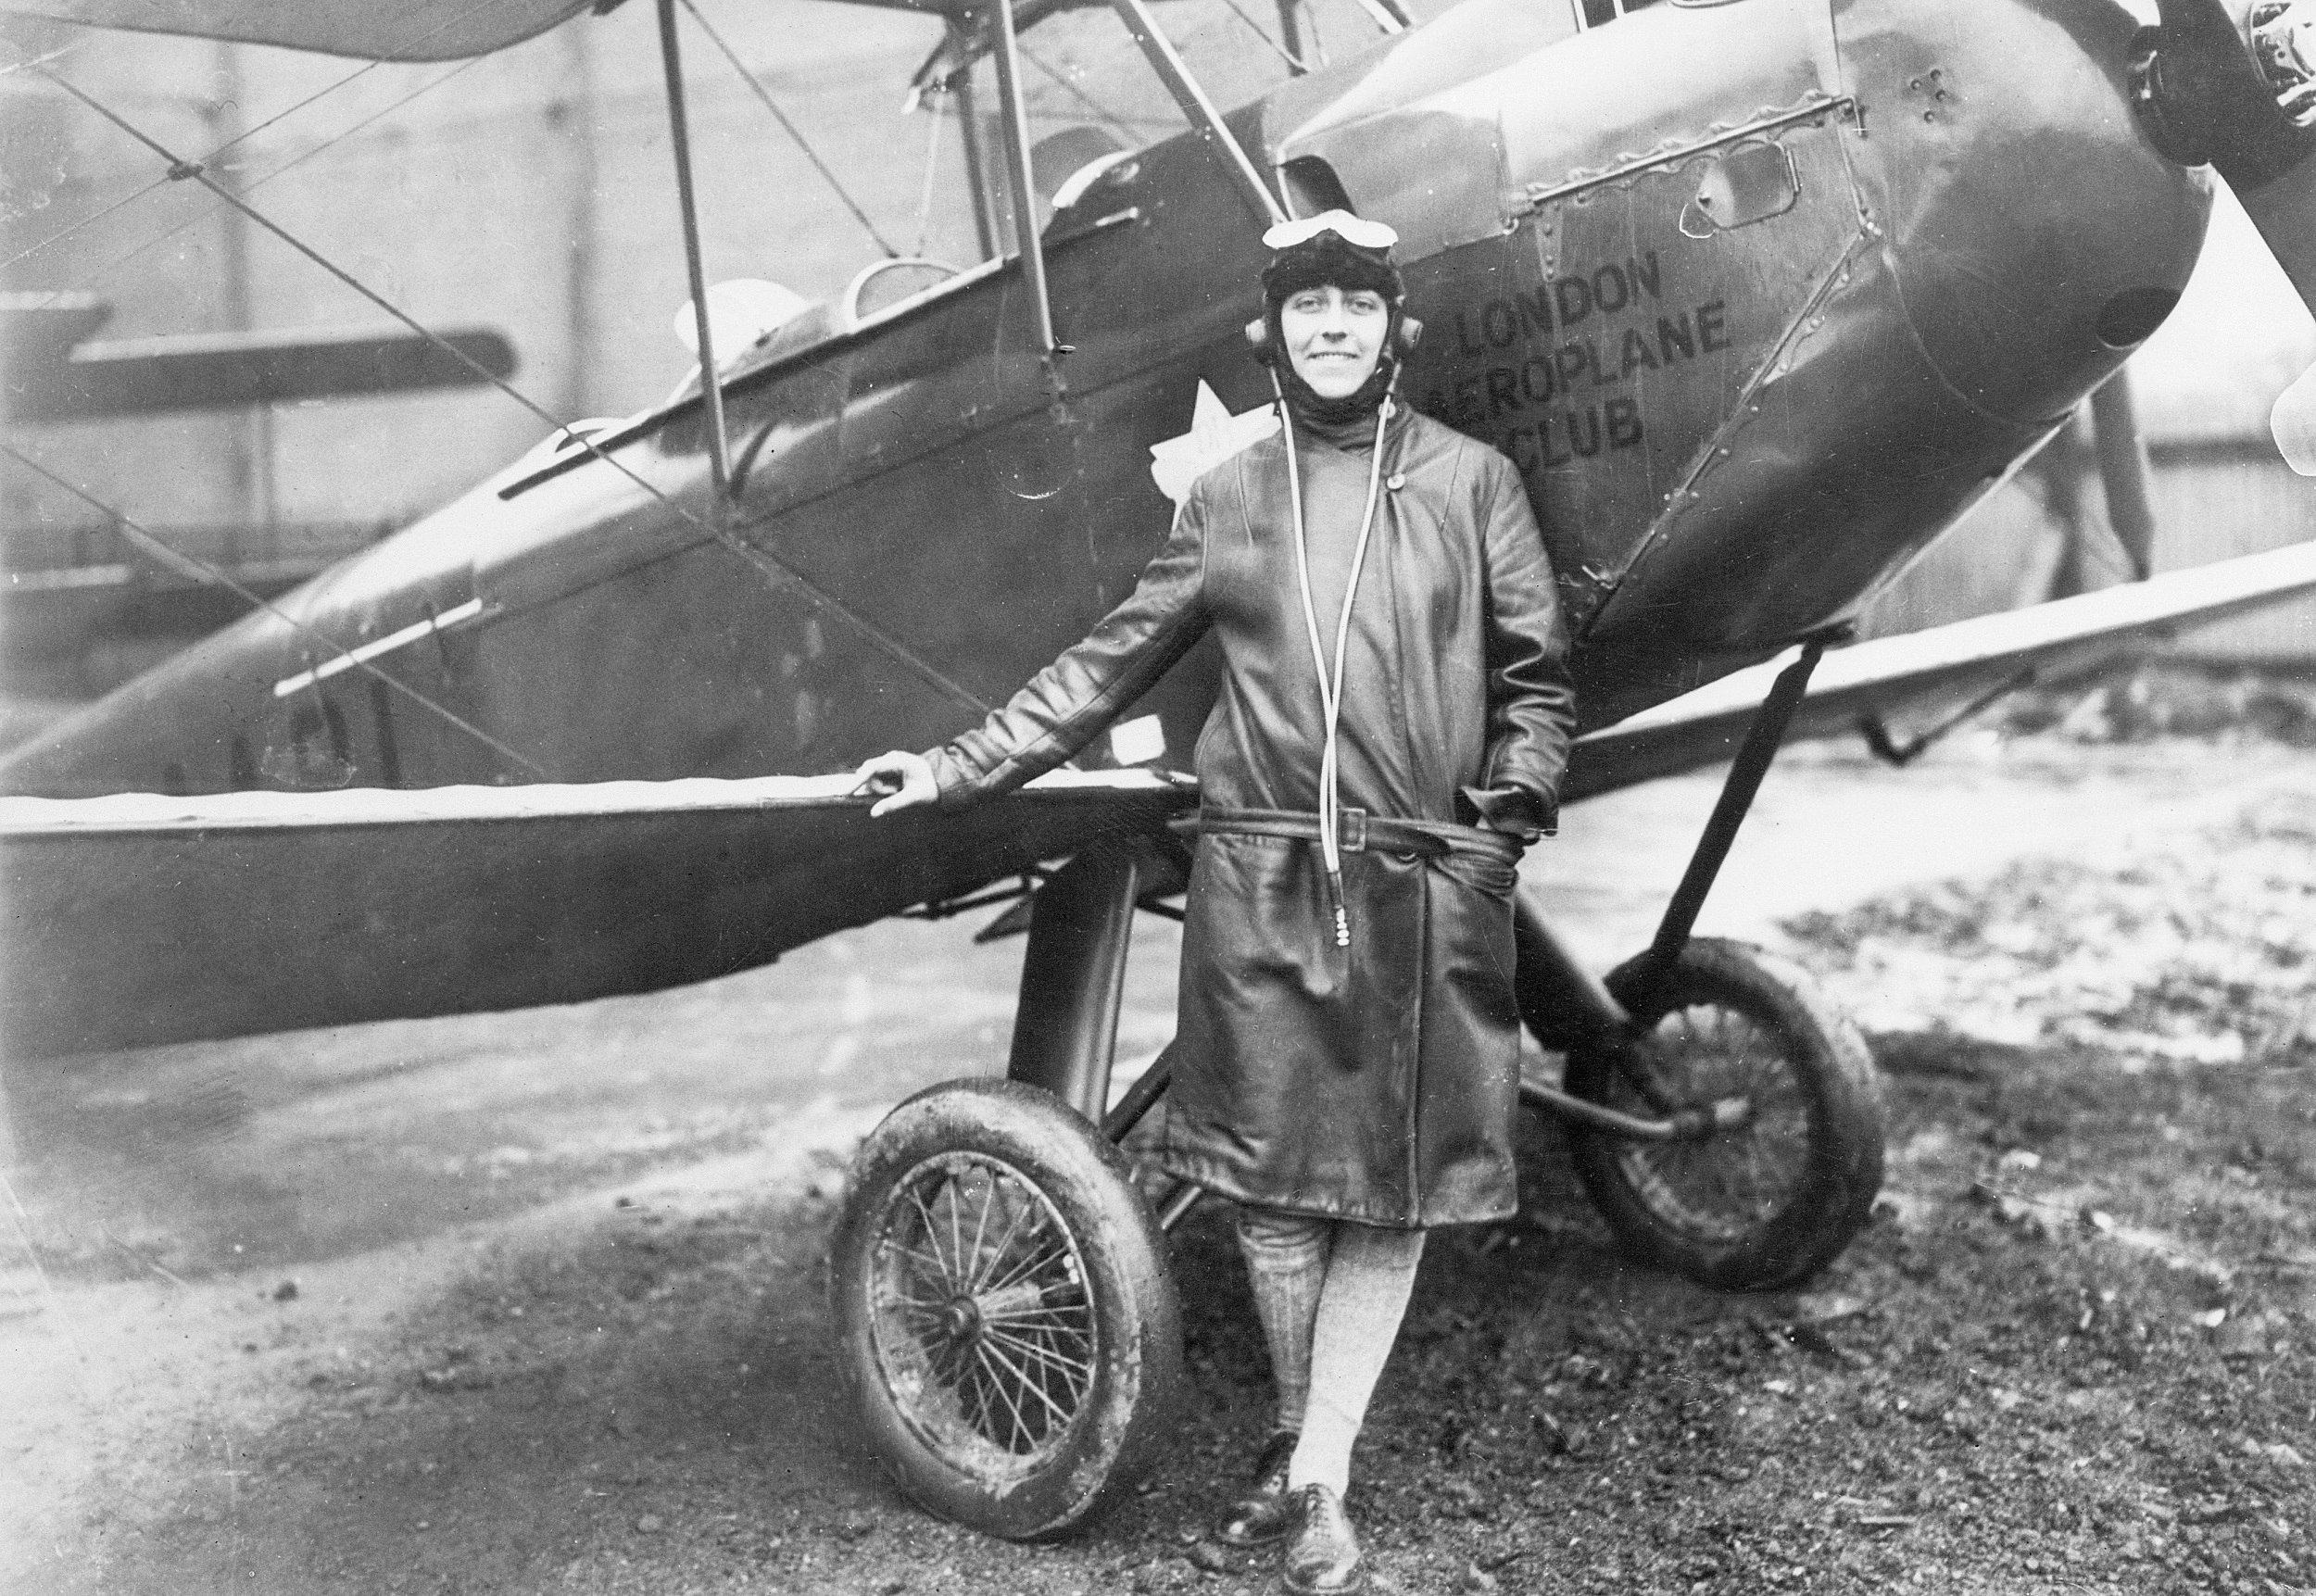 Black-and-white image of a woman wearing a three-quarter length coat with flight goggles on her head standing near a biplane